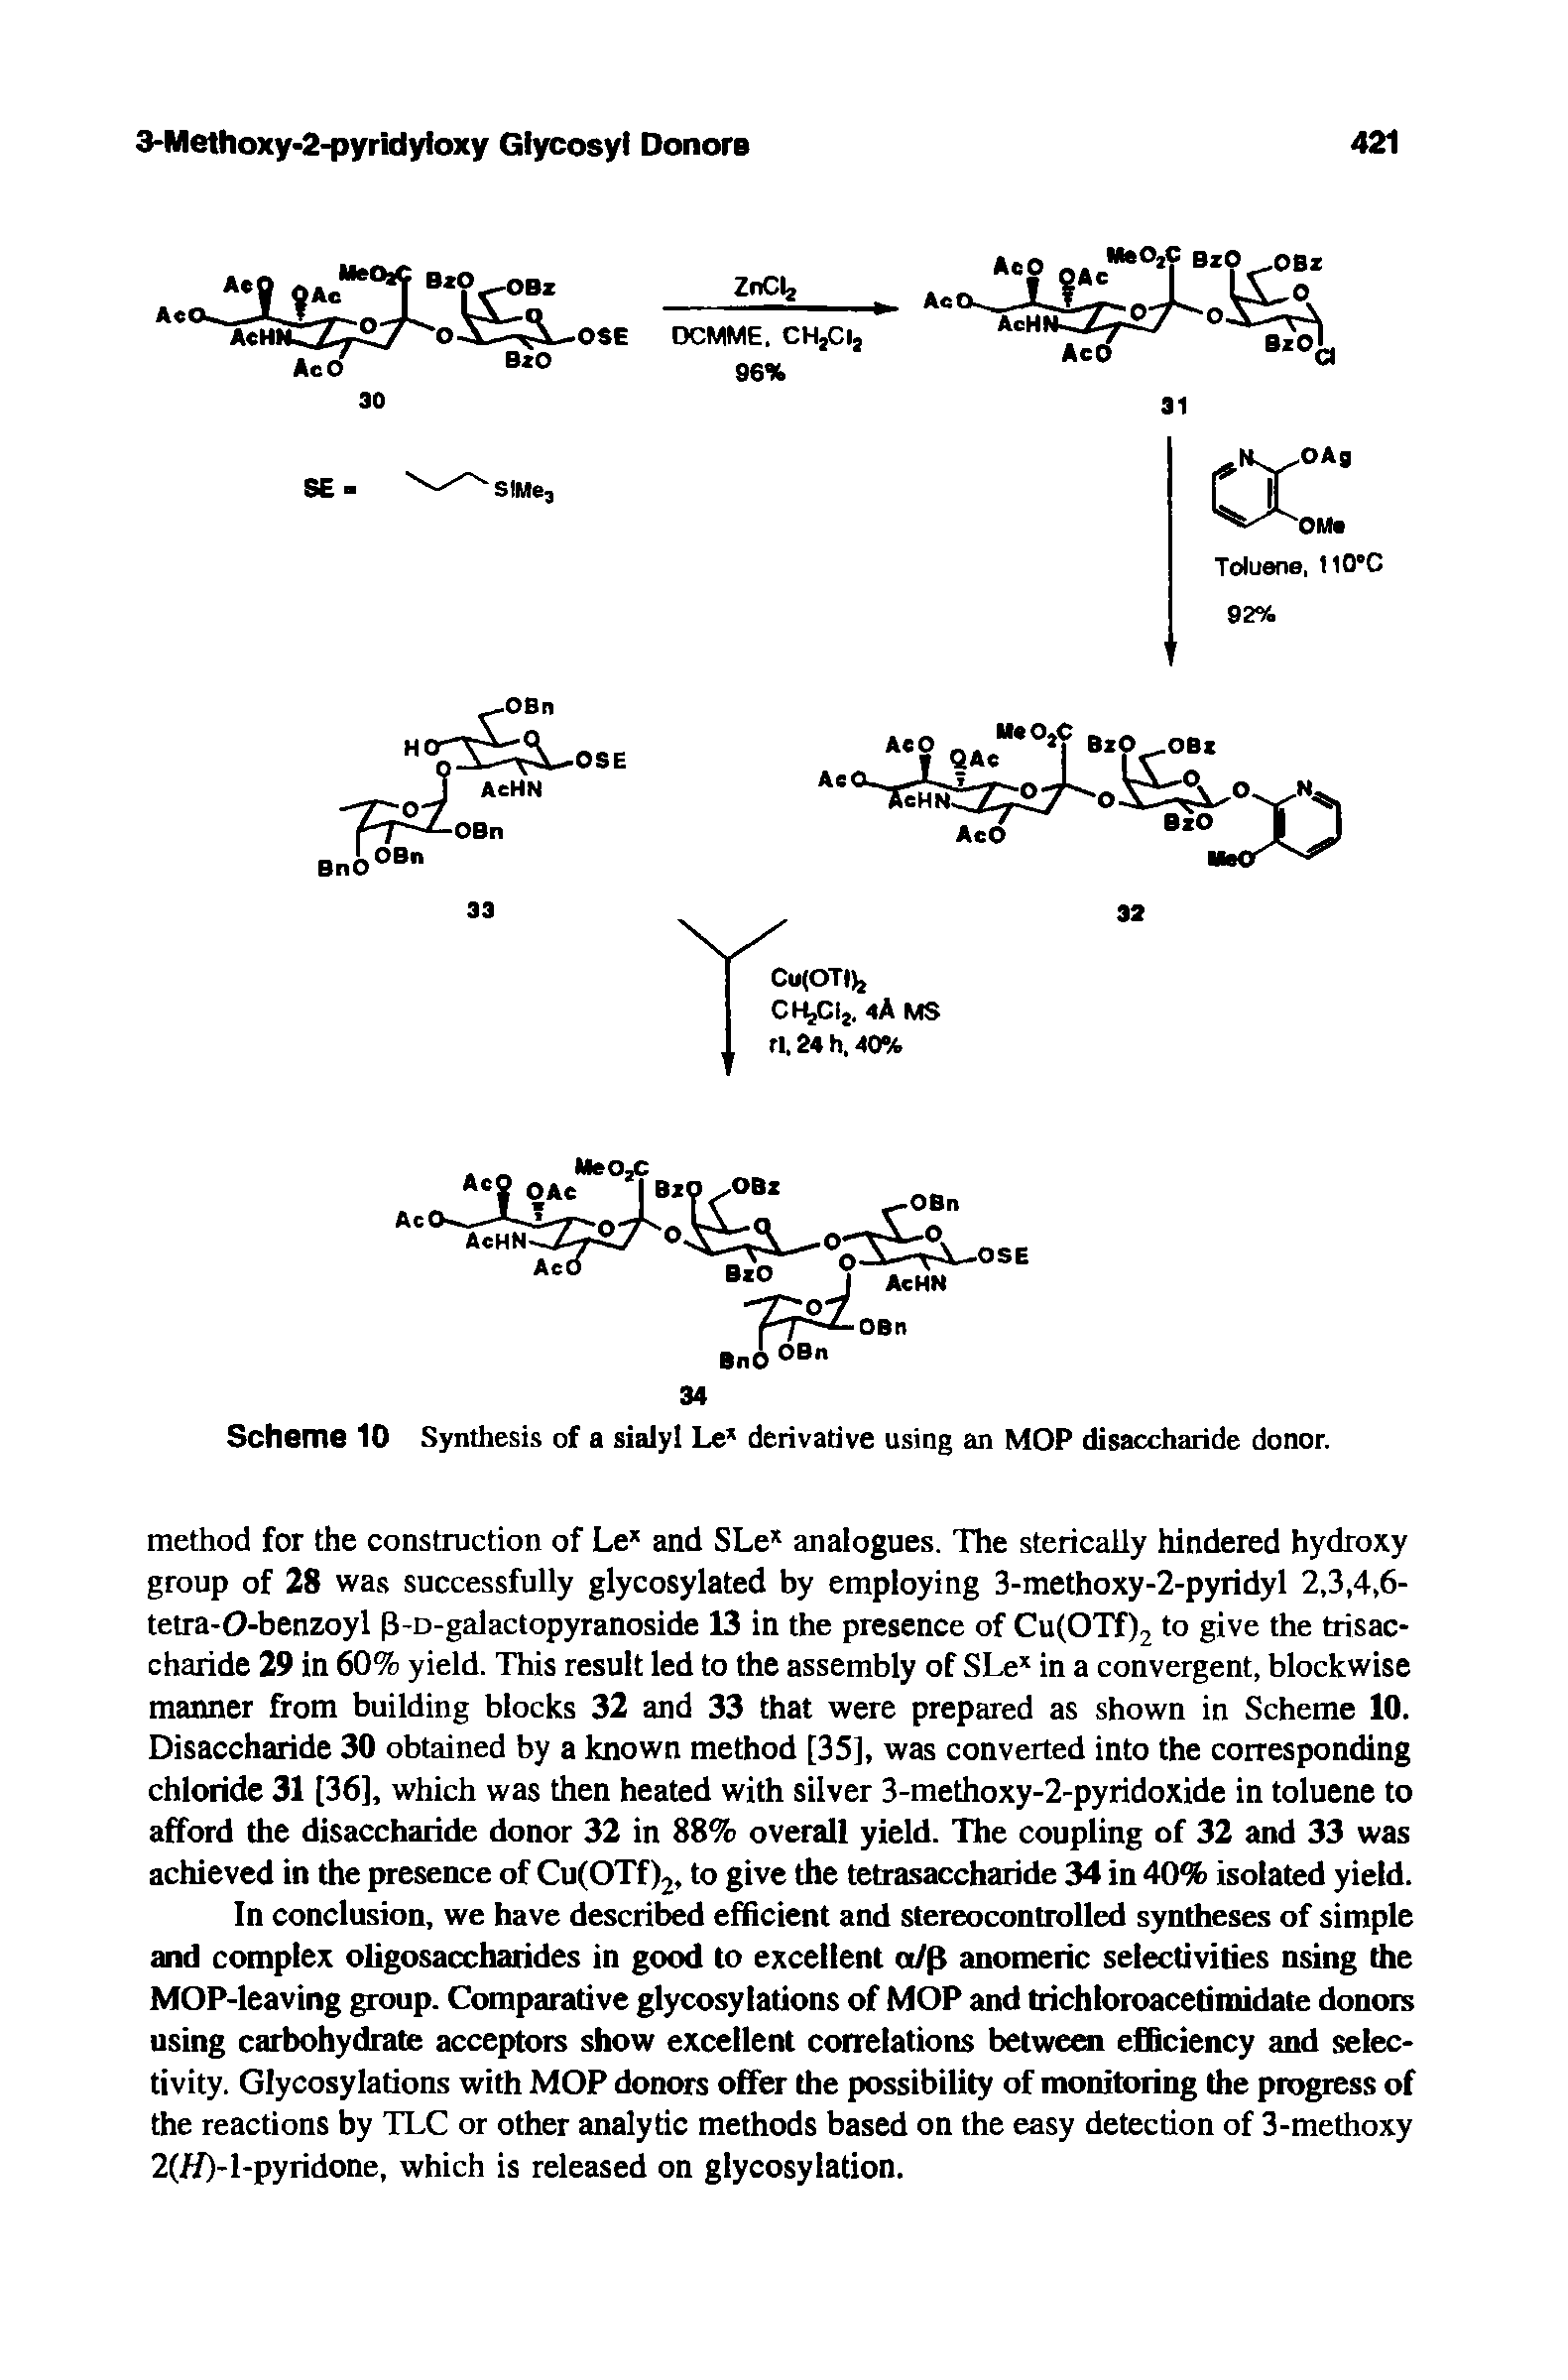 Scheme 10 Synthesis of a sialyl Lex derivative using an MOP disaccharide donor.